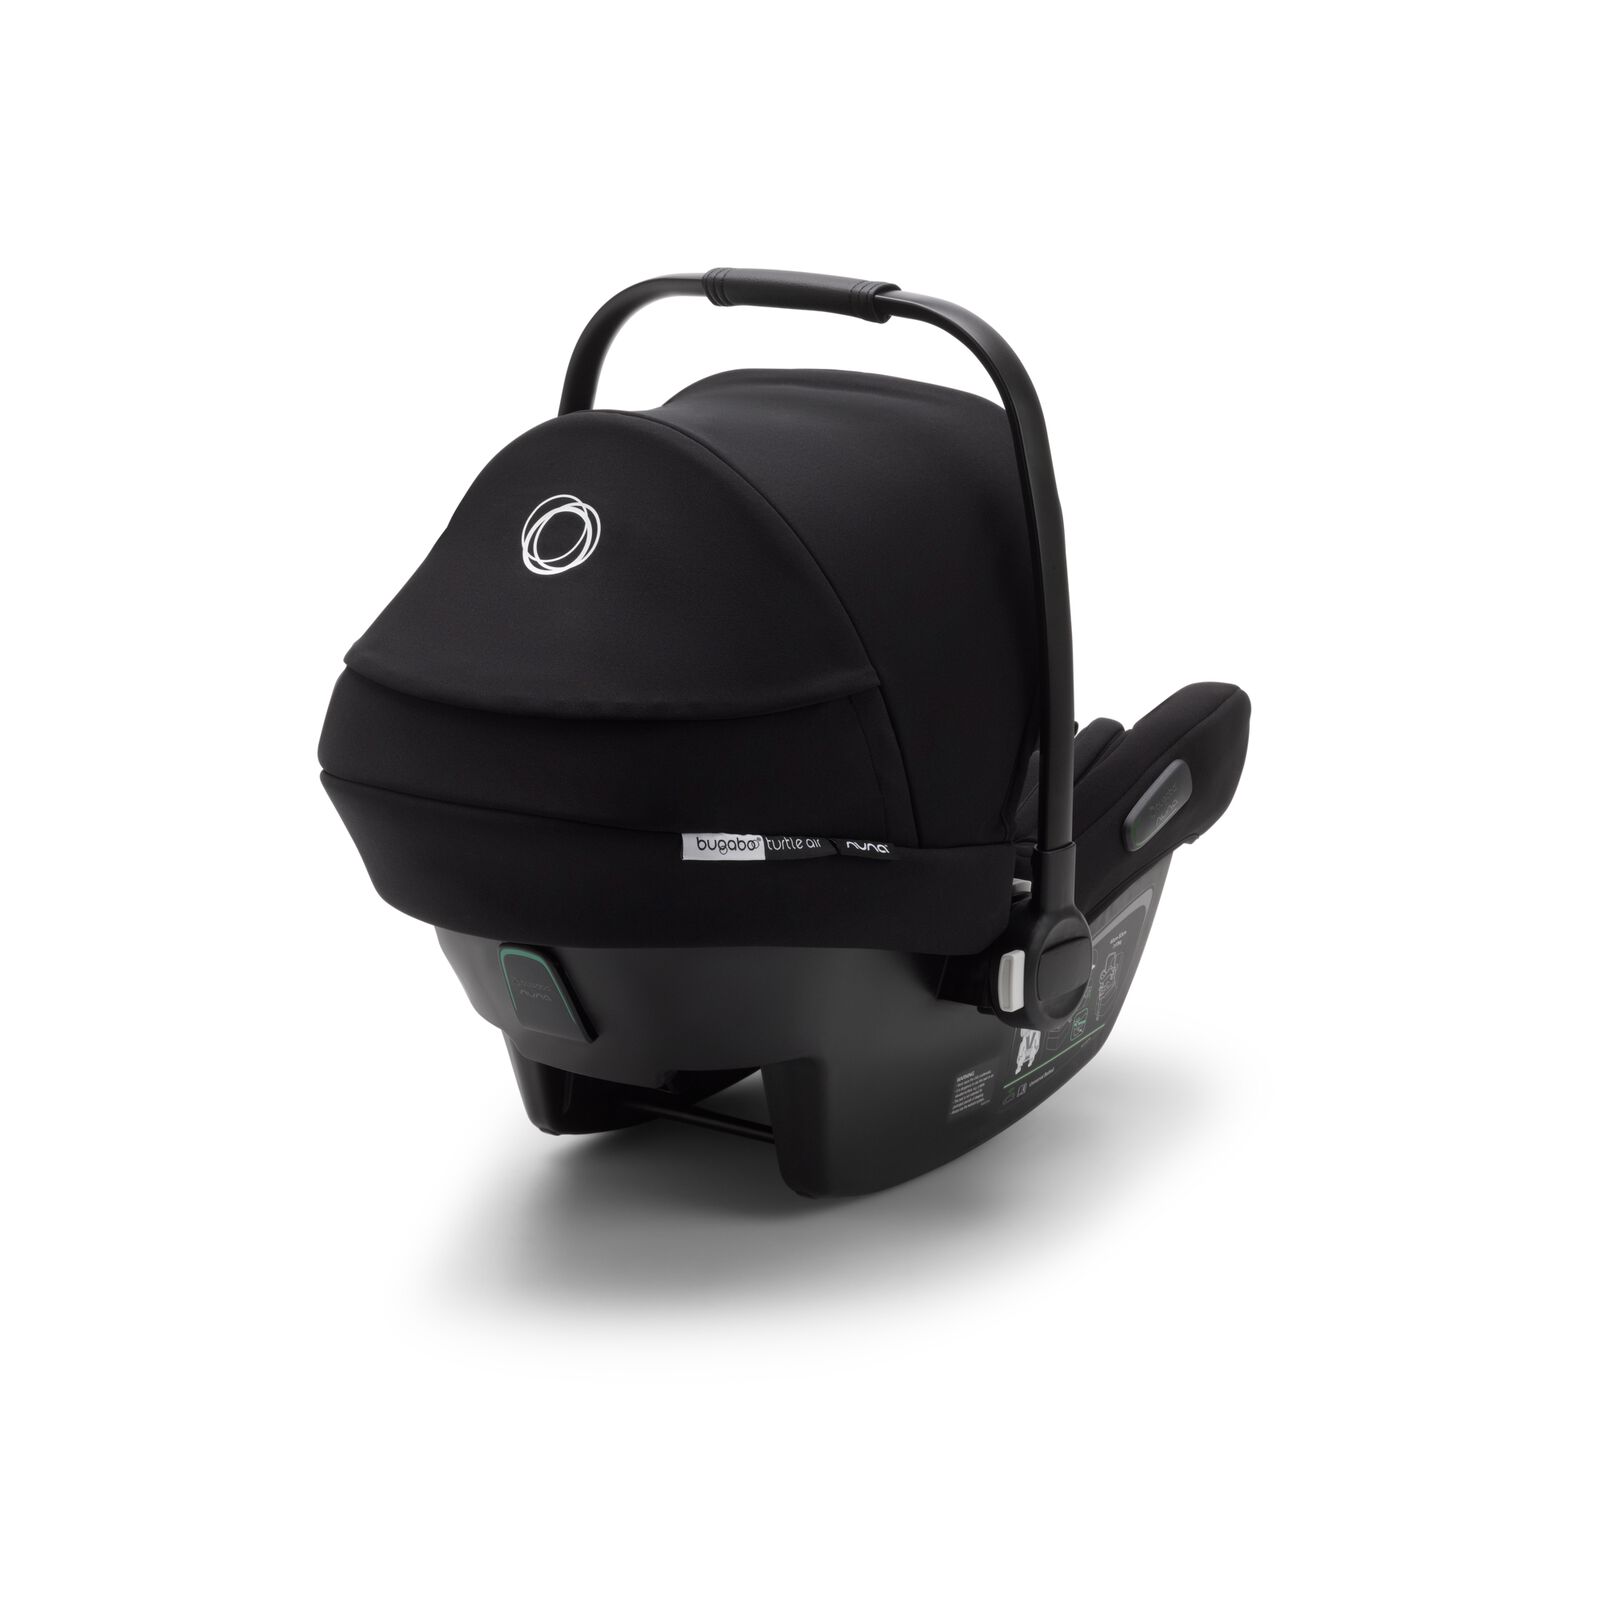 Bugaboo Donkey 3 Twin travel system - View 6